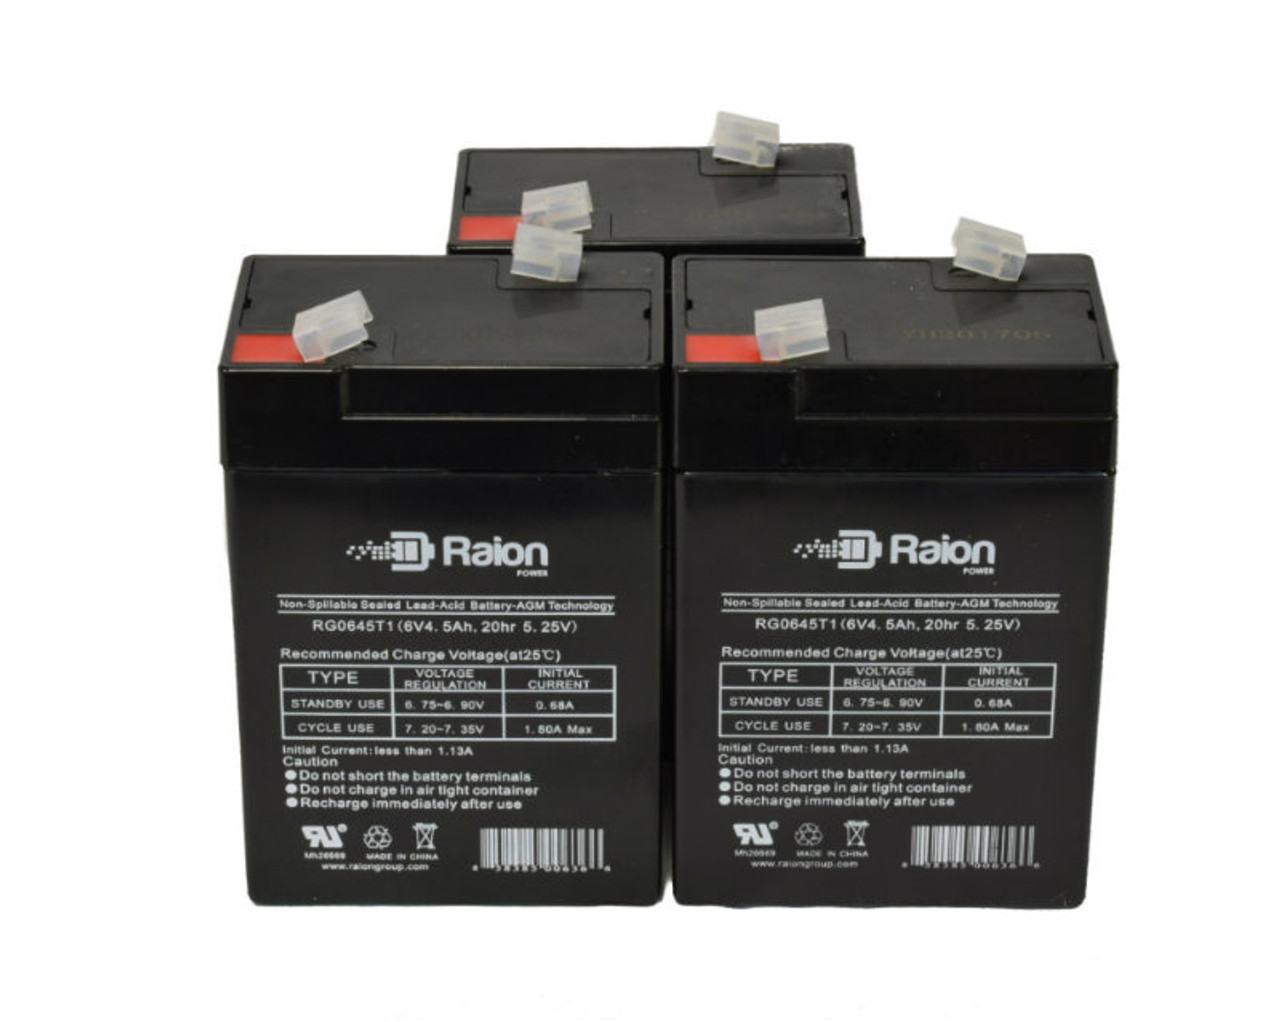 Raion Power RG0645T1 6V 4.5Ah Replacement Fire Alarm Control Panel Battery Cartridge for Ademco 25404 - 3 Pack